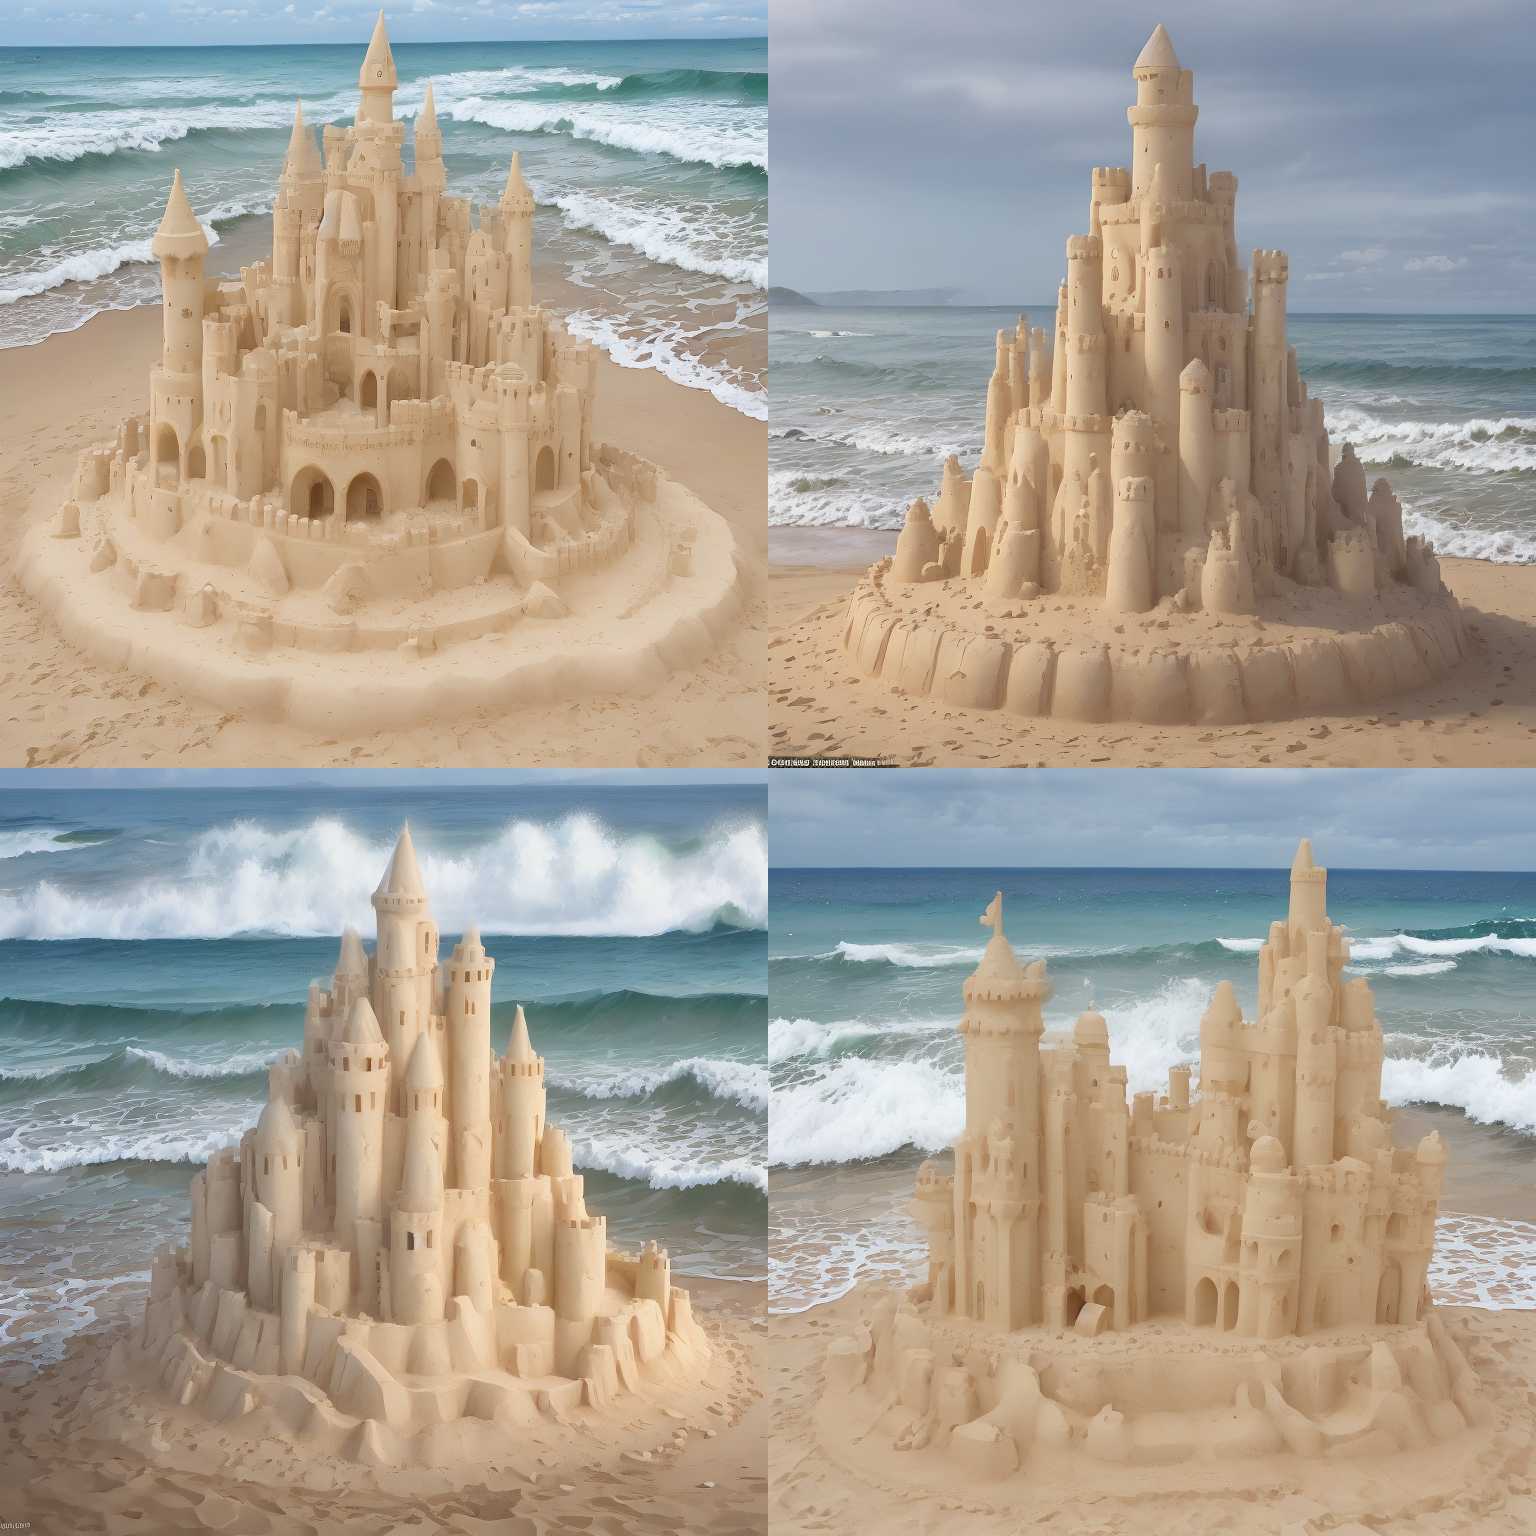 A sandcastle after being hit by a strong wave